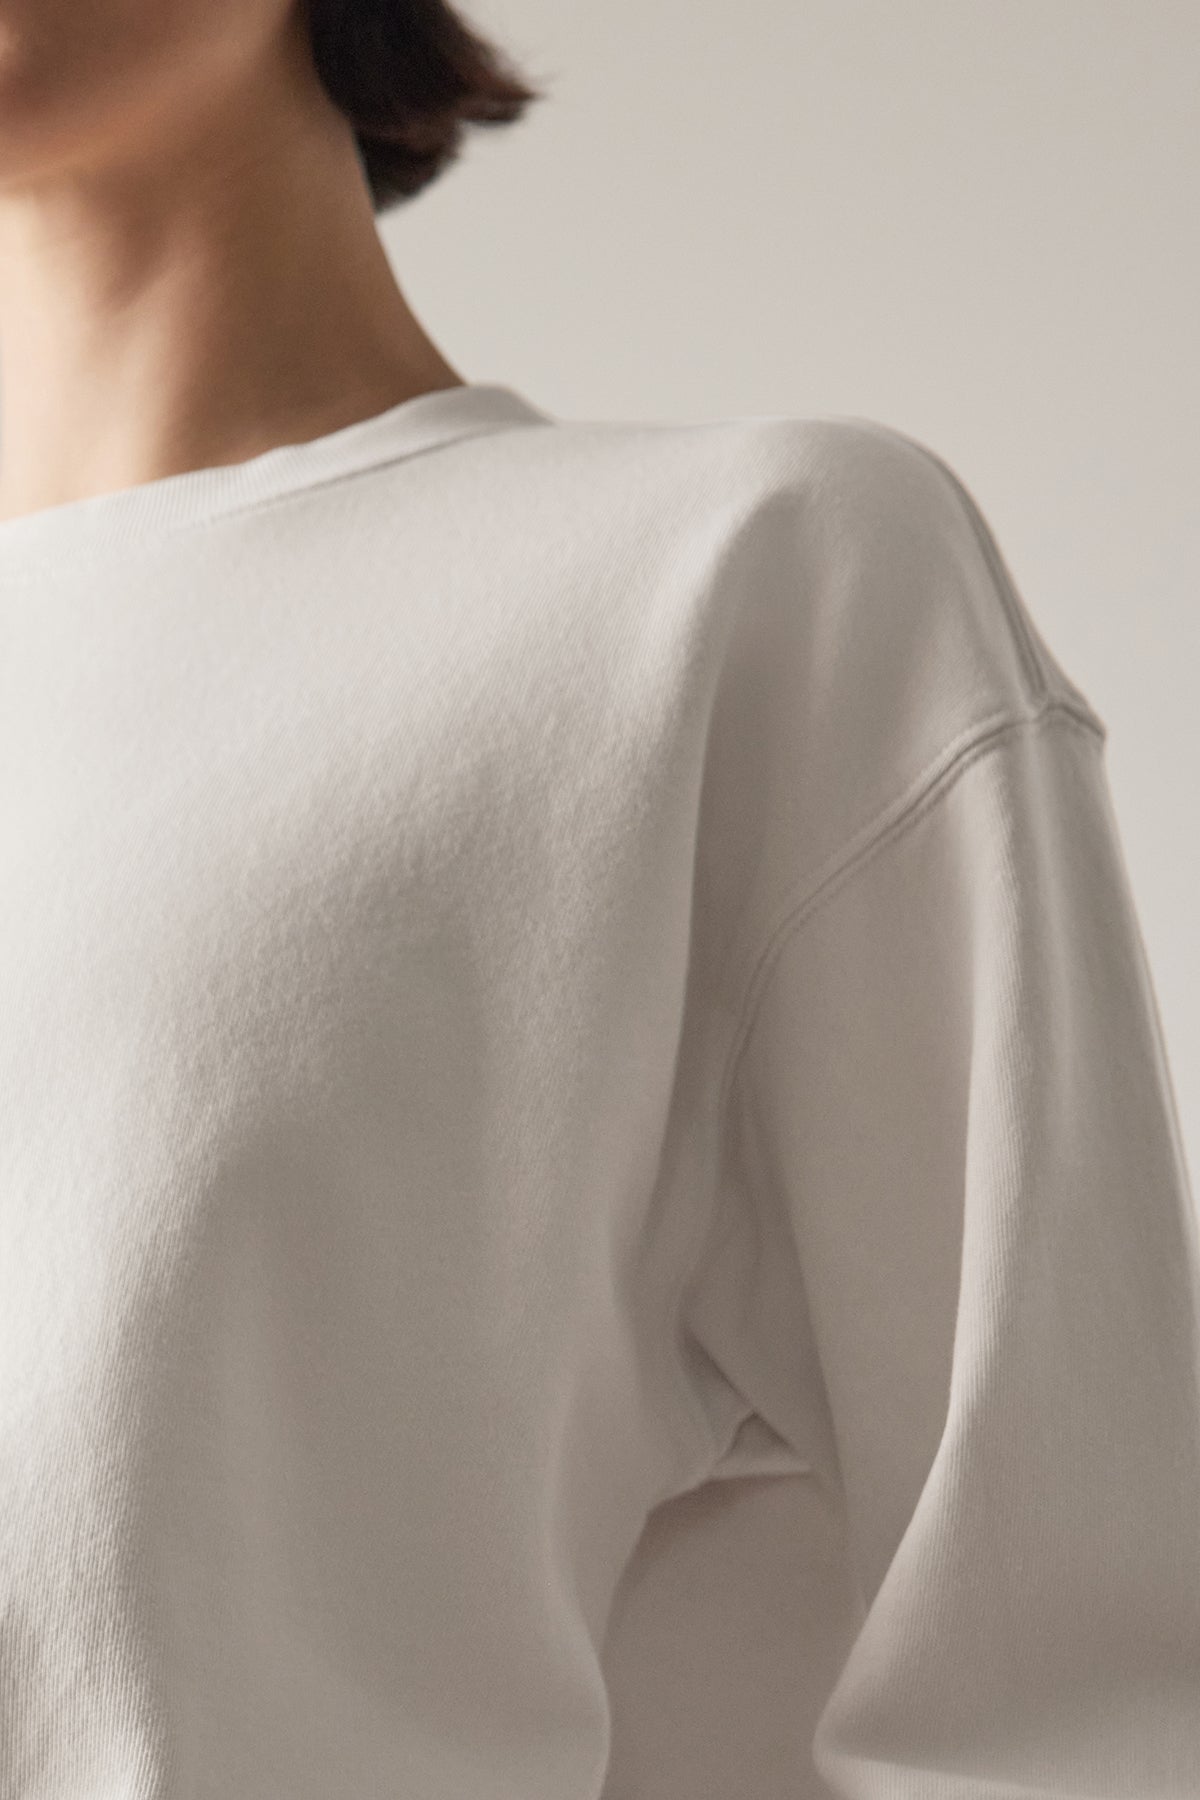   Rear view of a woman wearing a Velvet by Jenny Graham Ynez Sweatshirt made of organic cotton, focusing on the shoulder seam and soft fabric texture. 